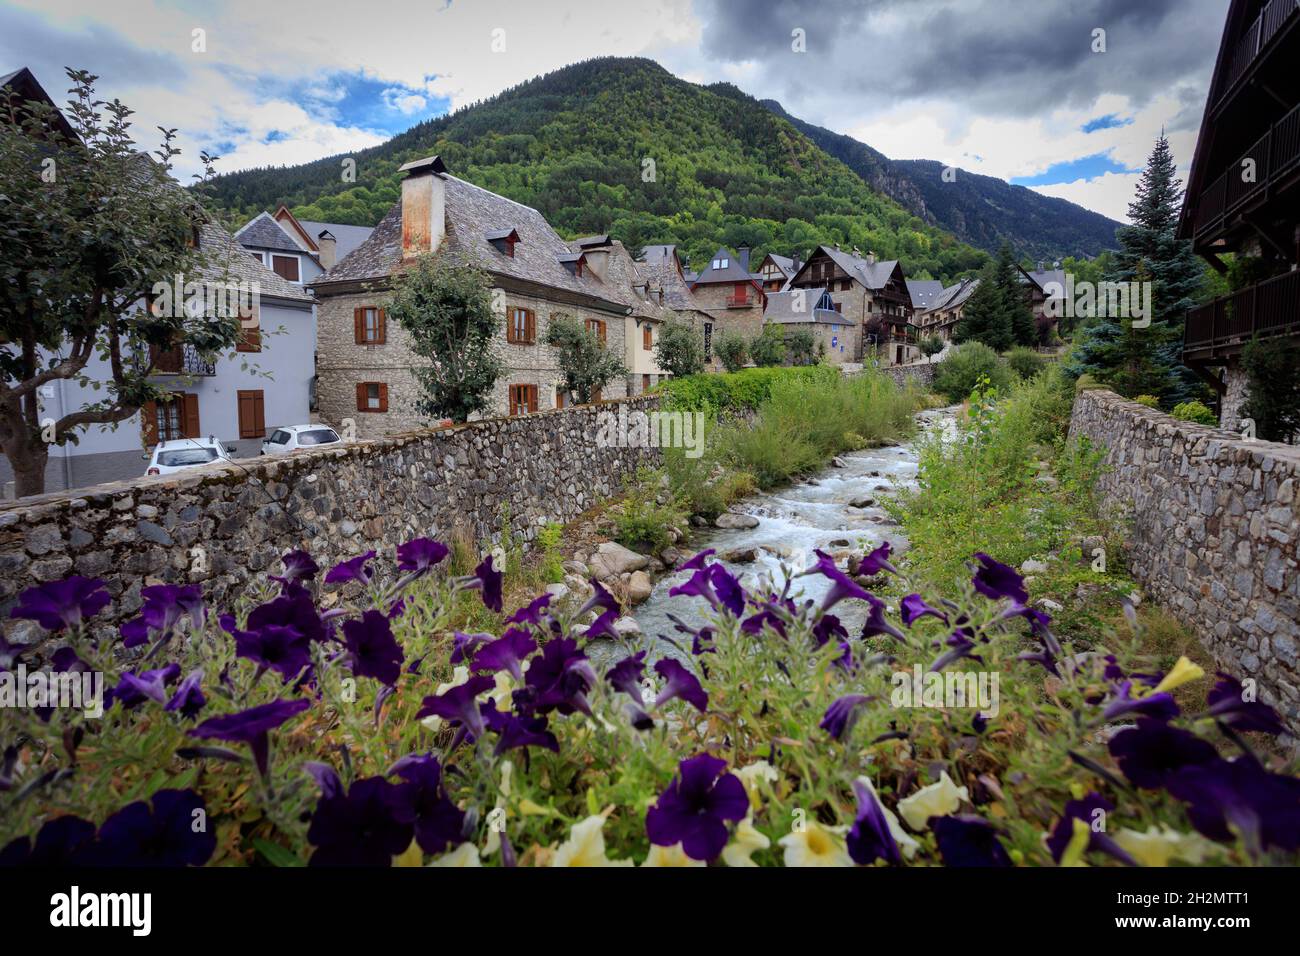 The village of Arties in the Aran Valley. The Pyrenees. Catalonia. Spain. Stock Photo